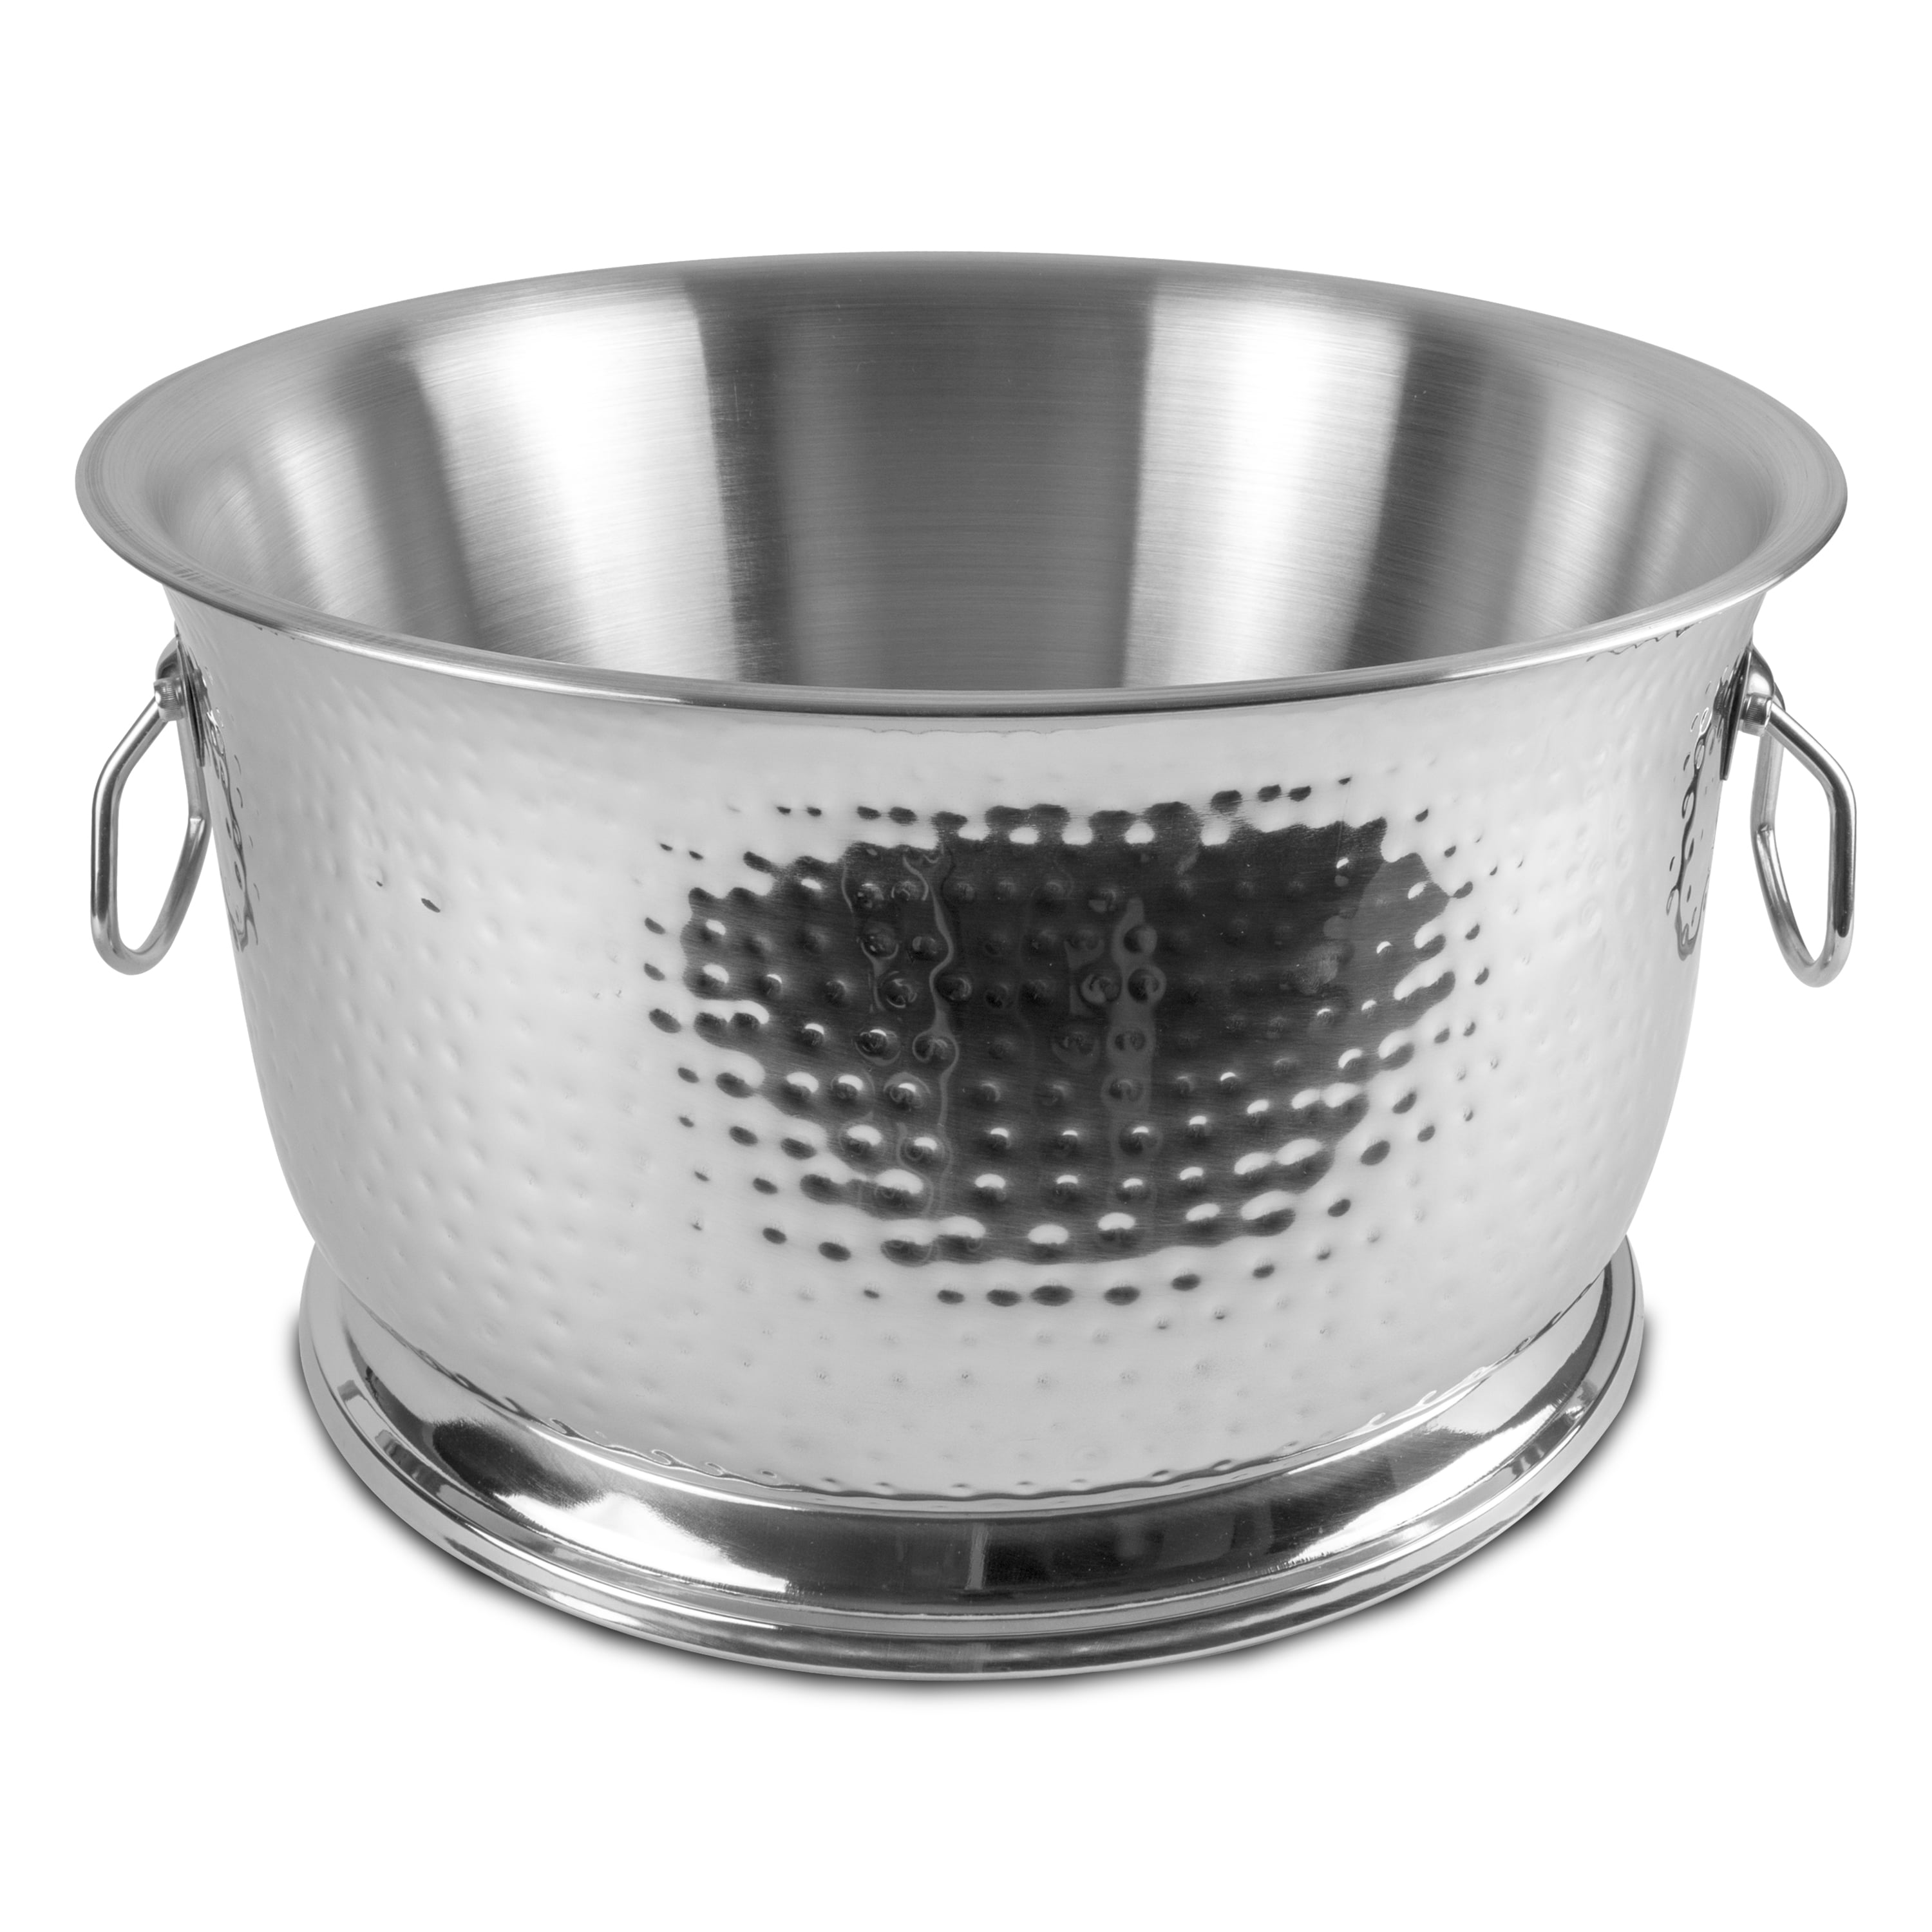 2-Gal Home Kitchen Stainless Steel Oval Beverage Cooler Ice Bucket Party Tub 